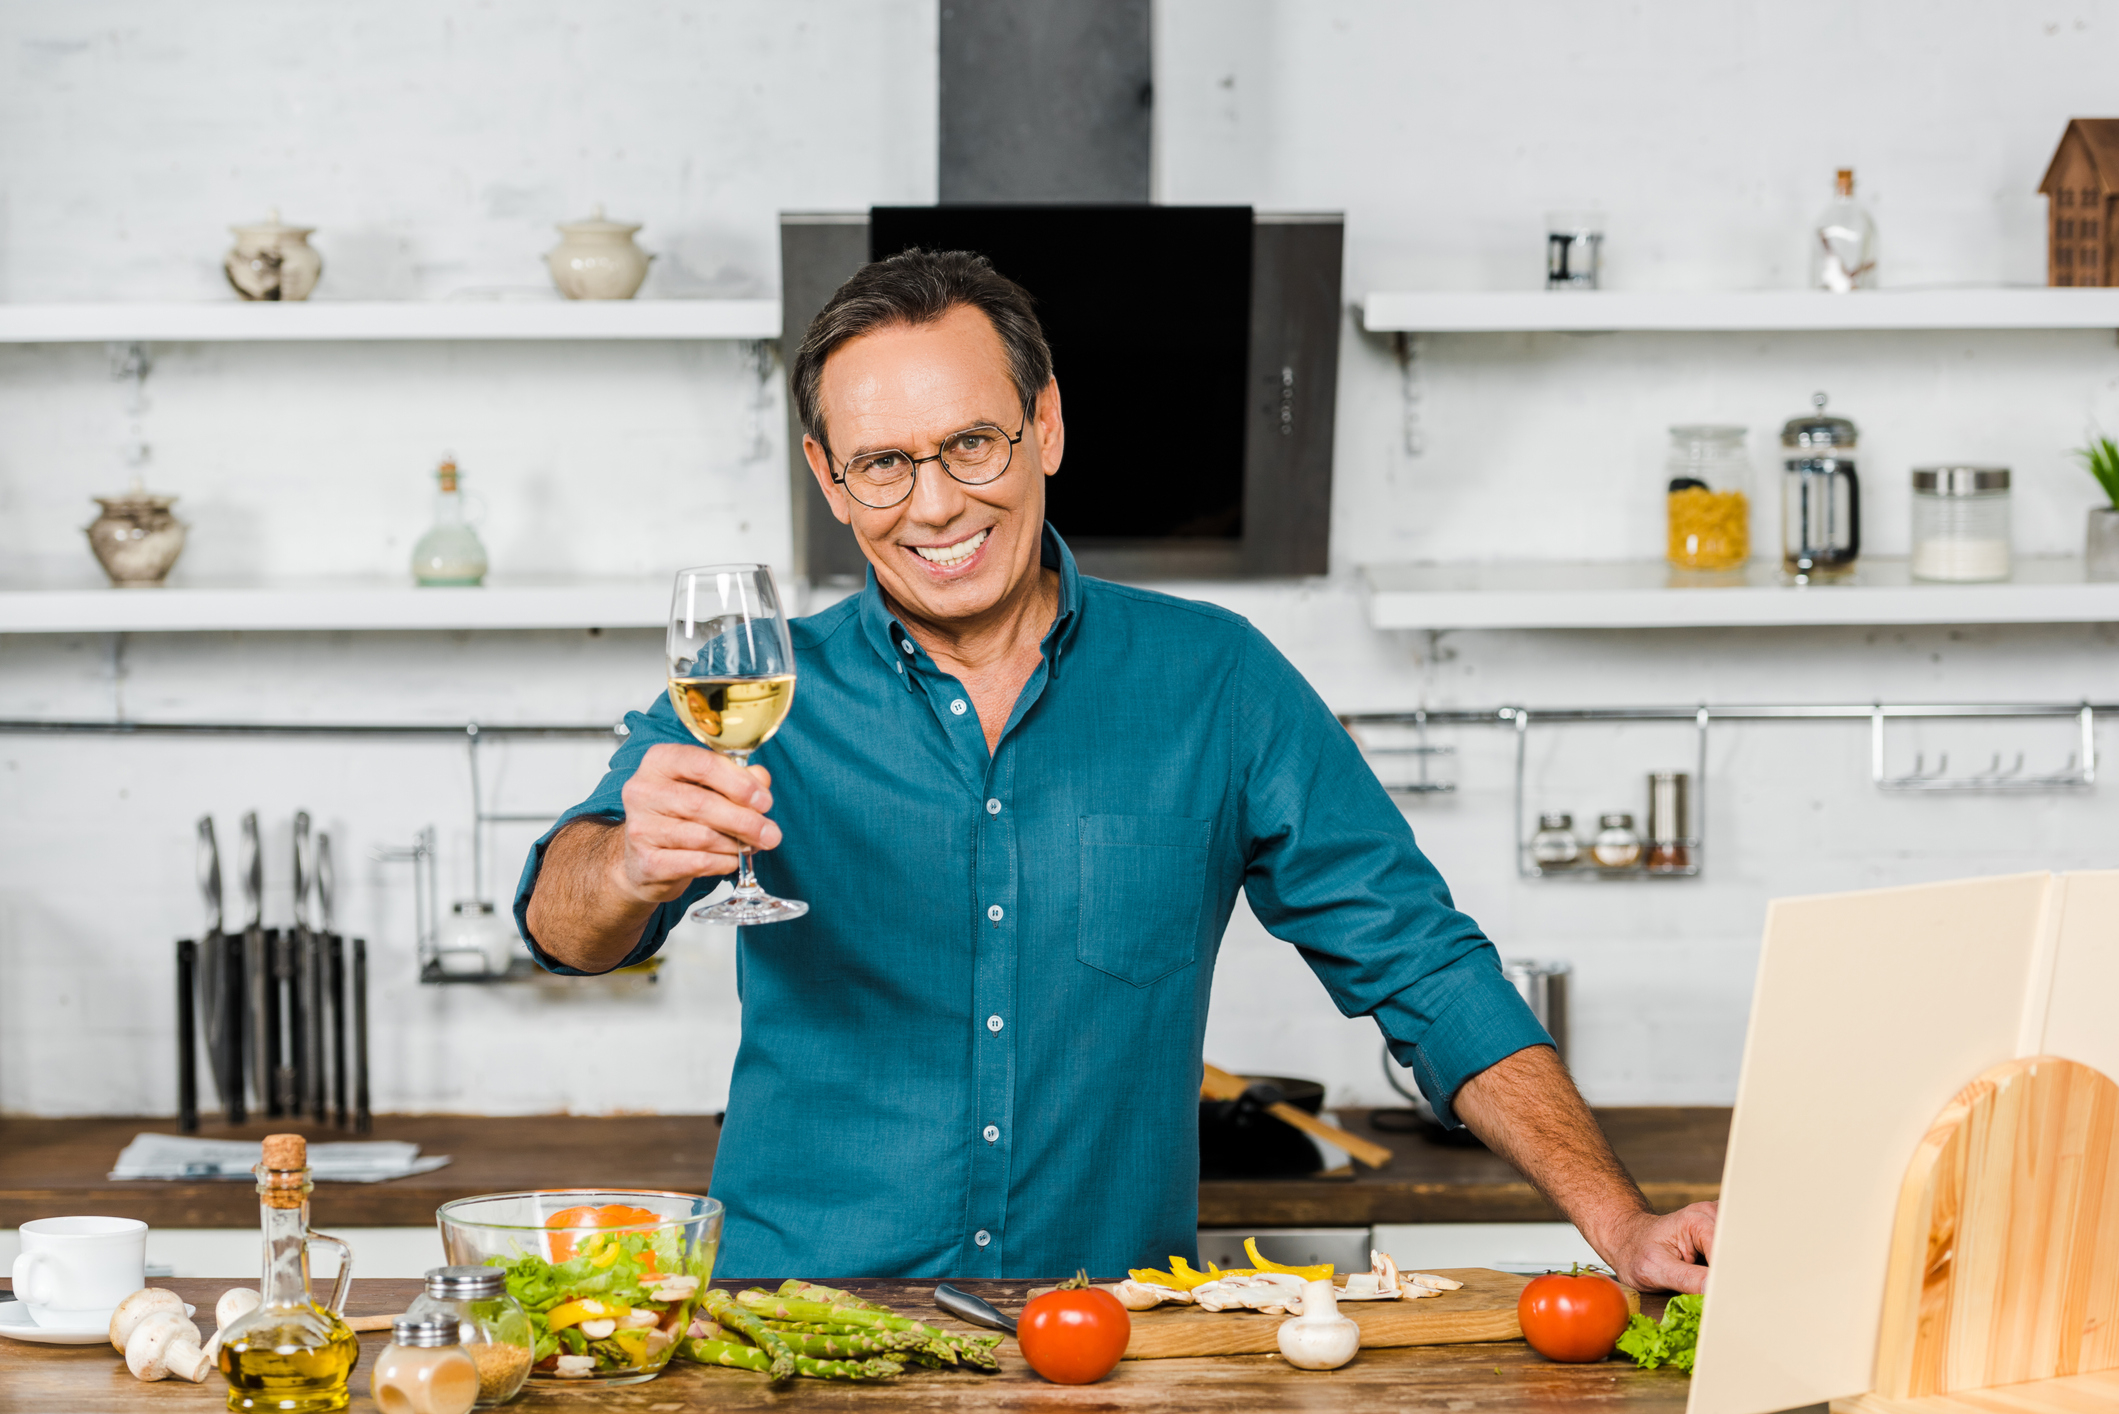 A man raising a glass and smiling as he cooks in the kitchen